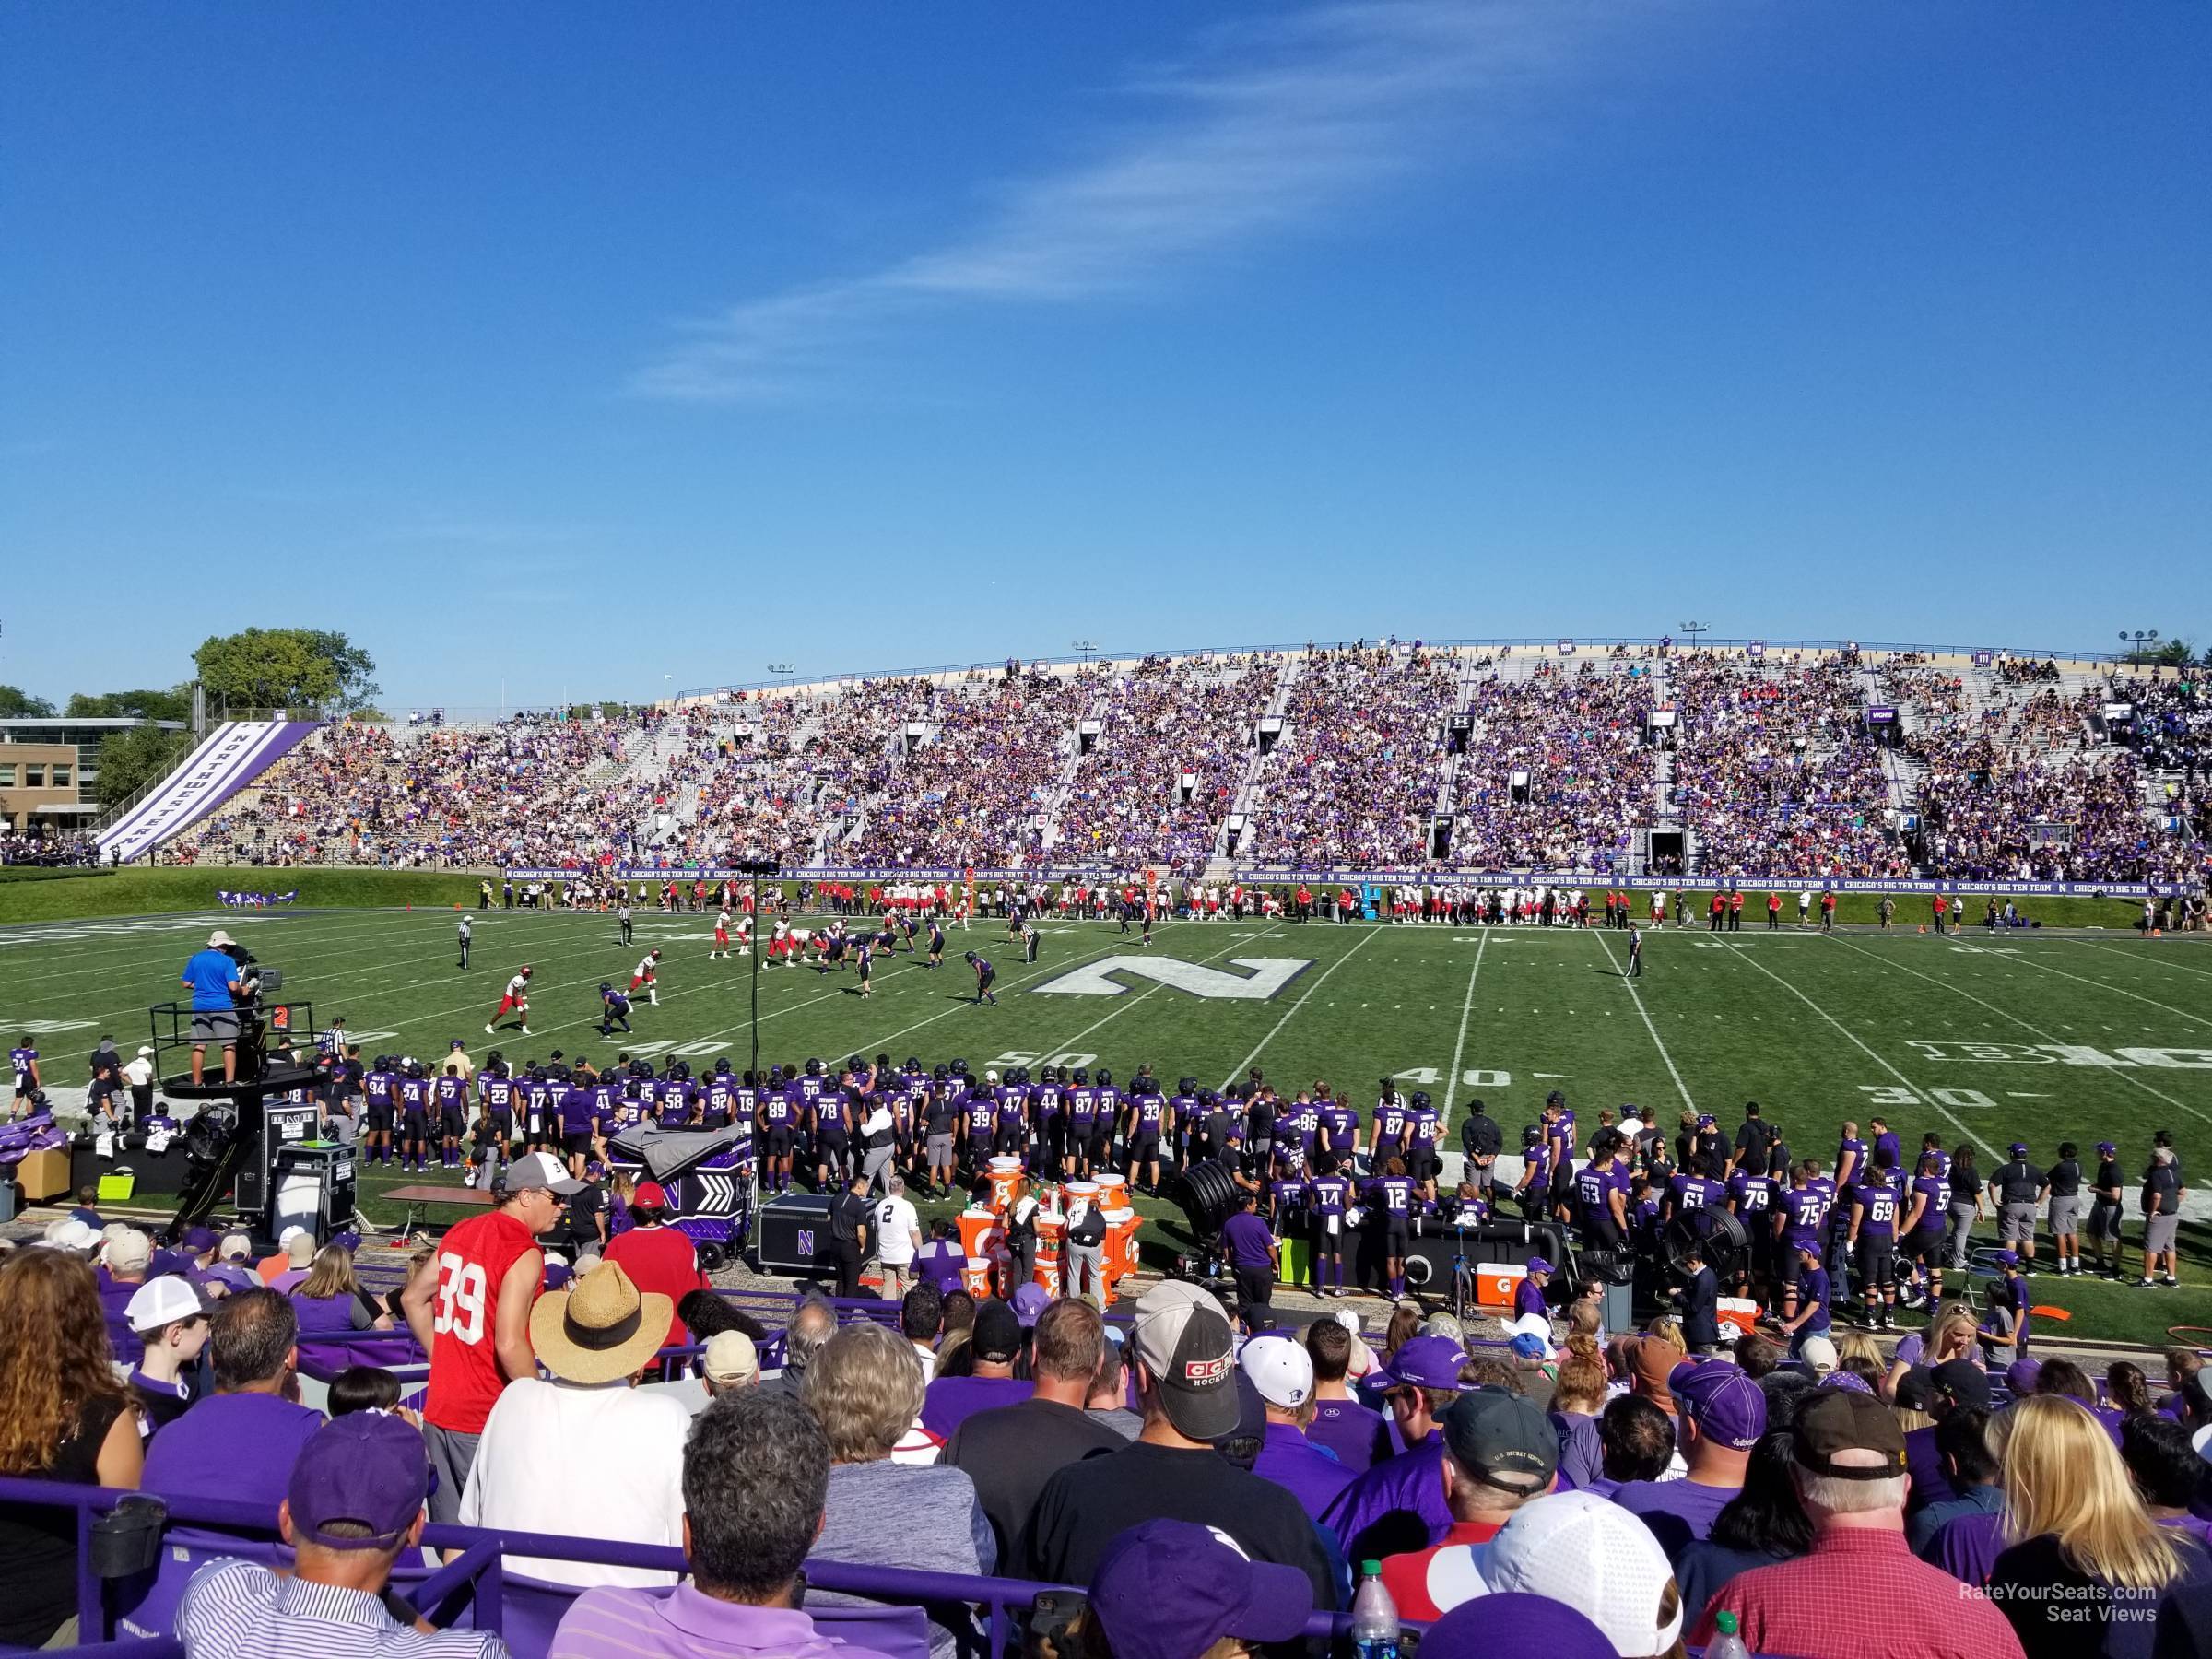 section 128, row 23 seat view  - ryan field